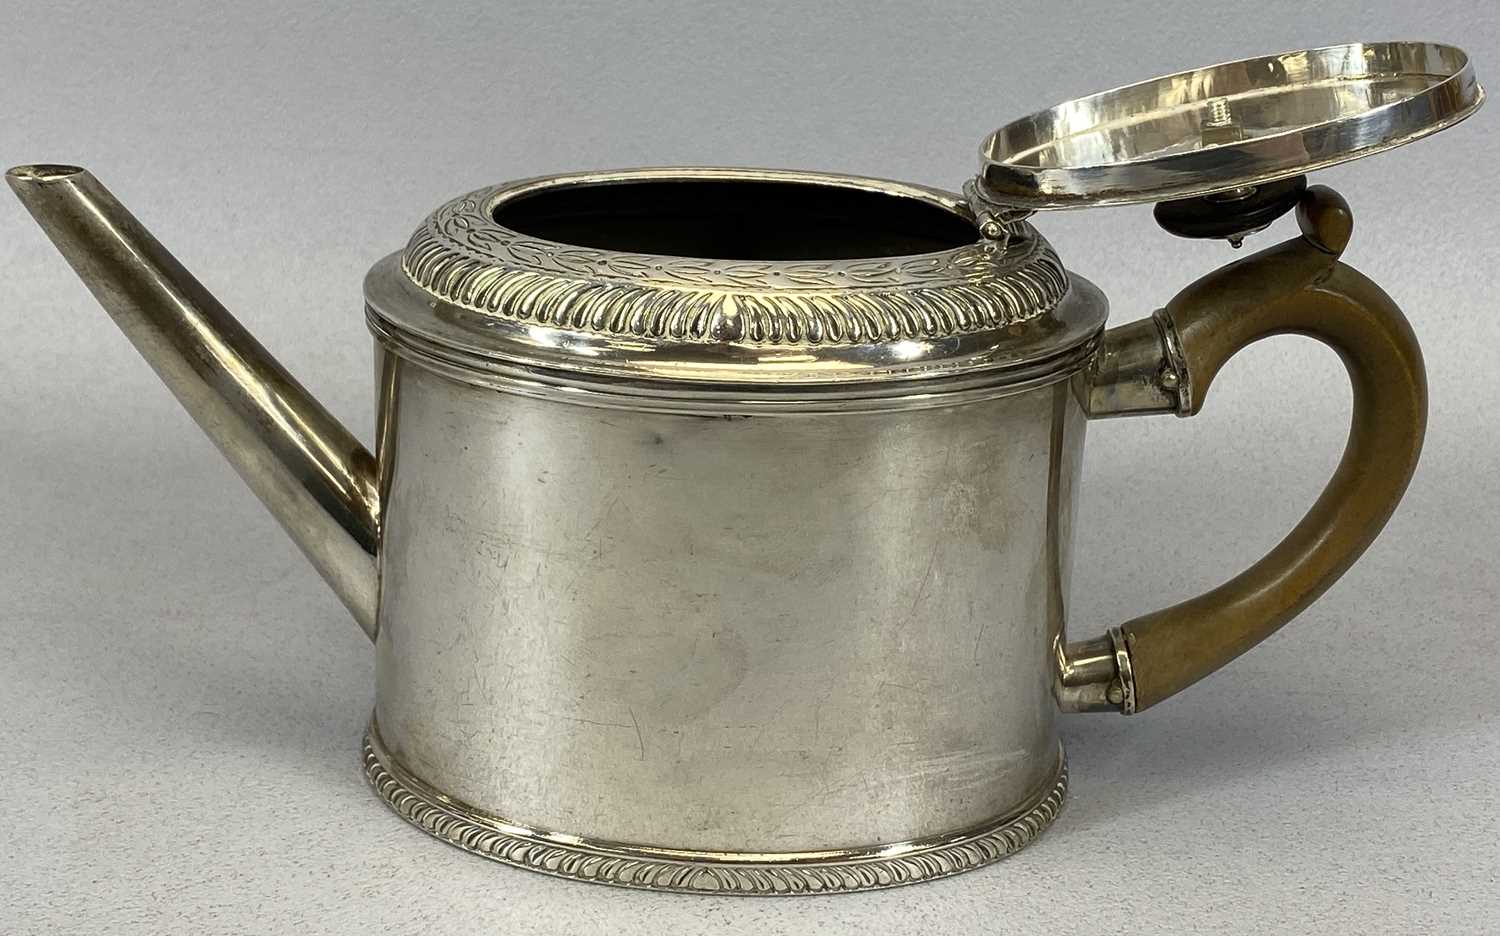 GEORGE III SILVER TEAPOT oval form with gadrooned and chased decoration to the hinged lid - Image 2 of 3